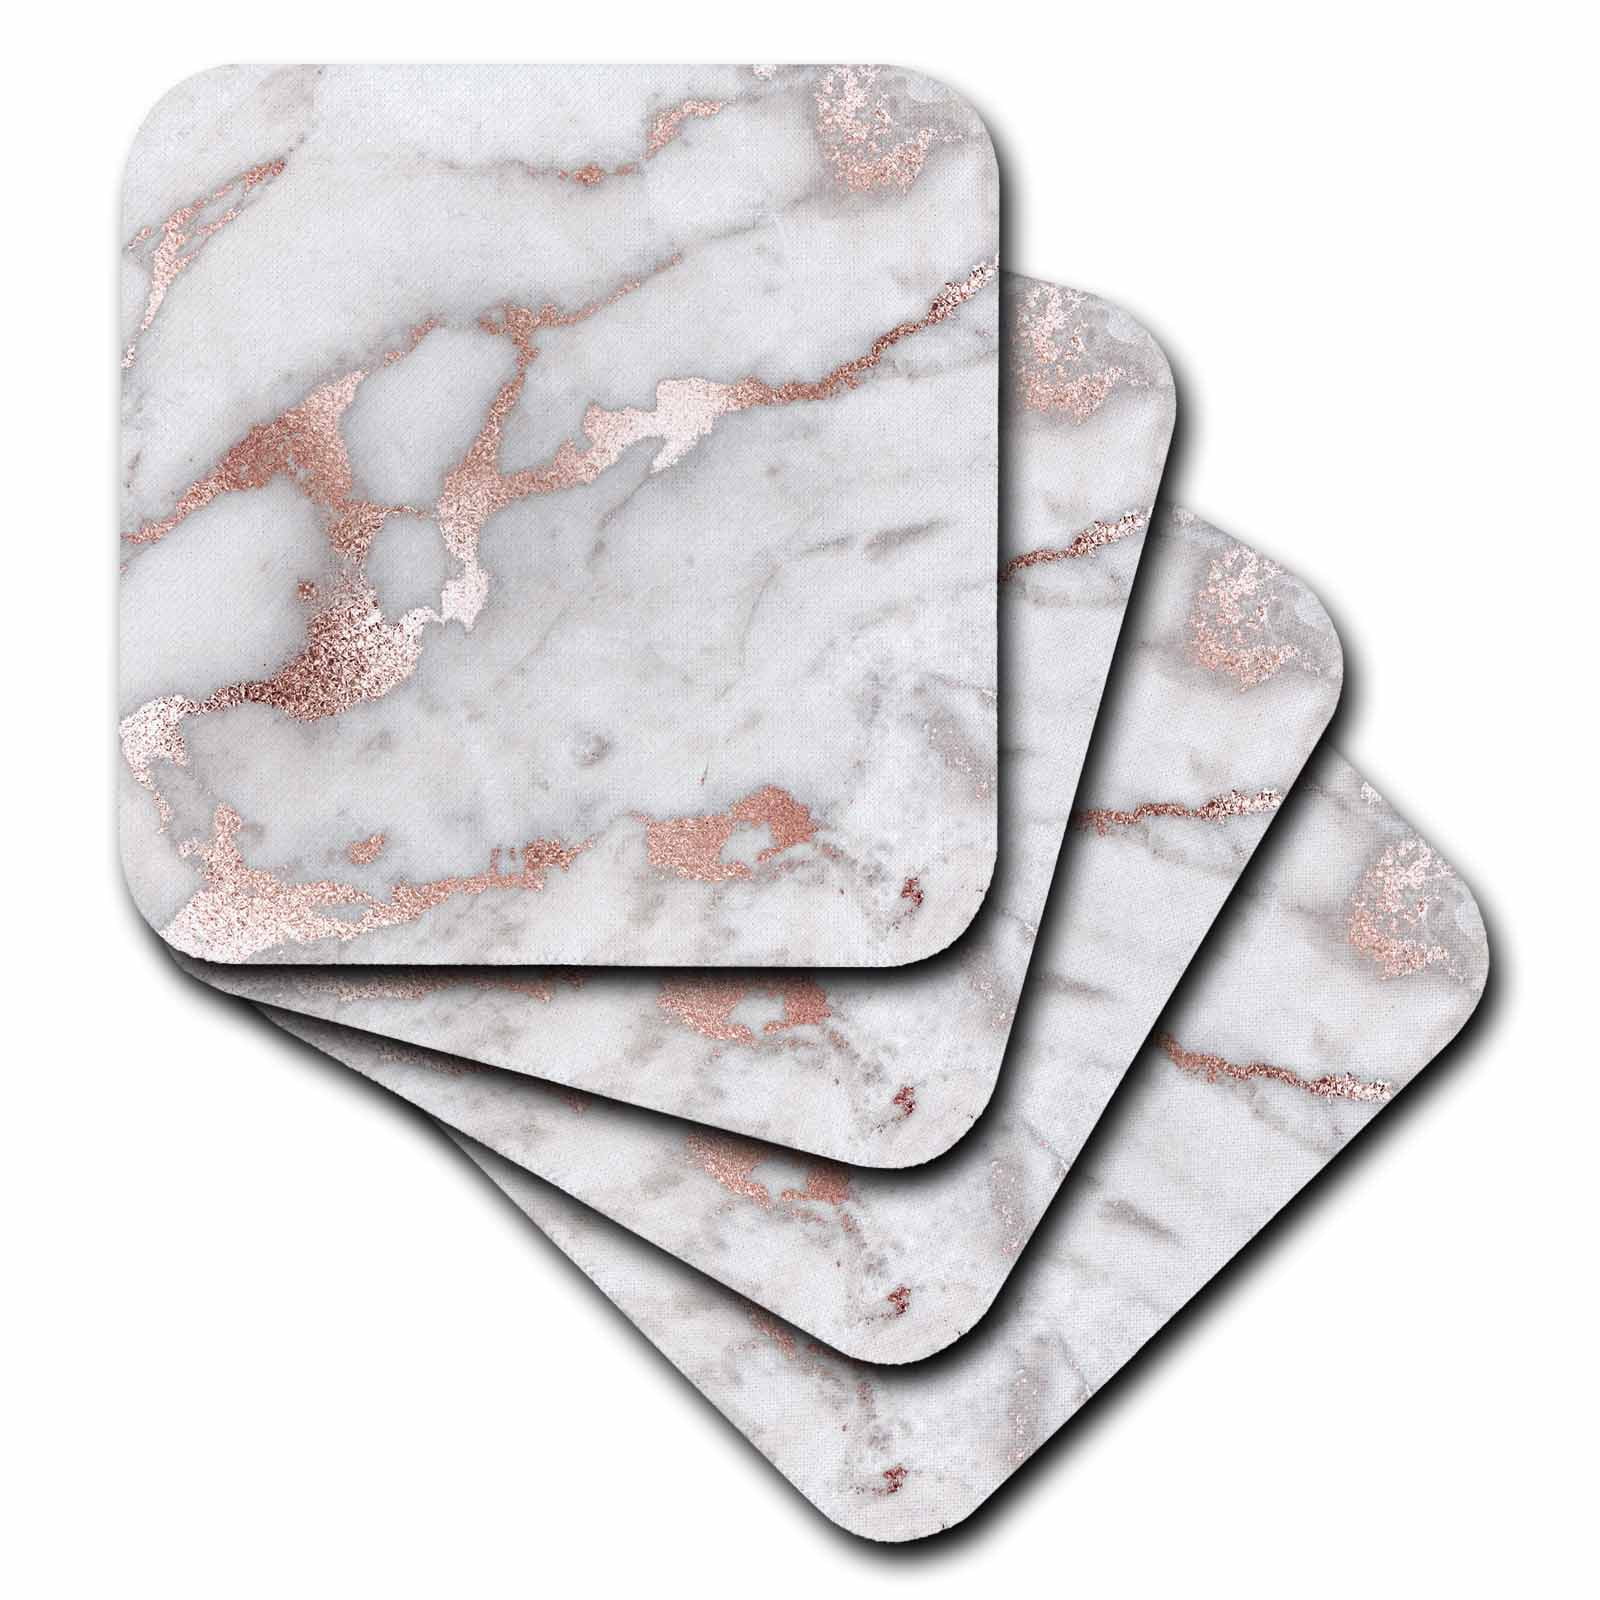 12 3dRose Image of Abstract Trendy Geometrical Copper Marble Rose Gold Square Pattern Ceramic Tile 